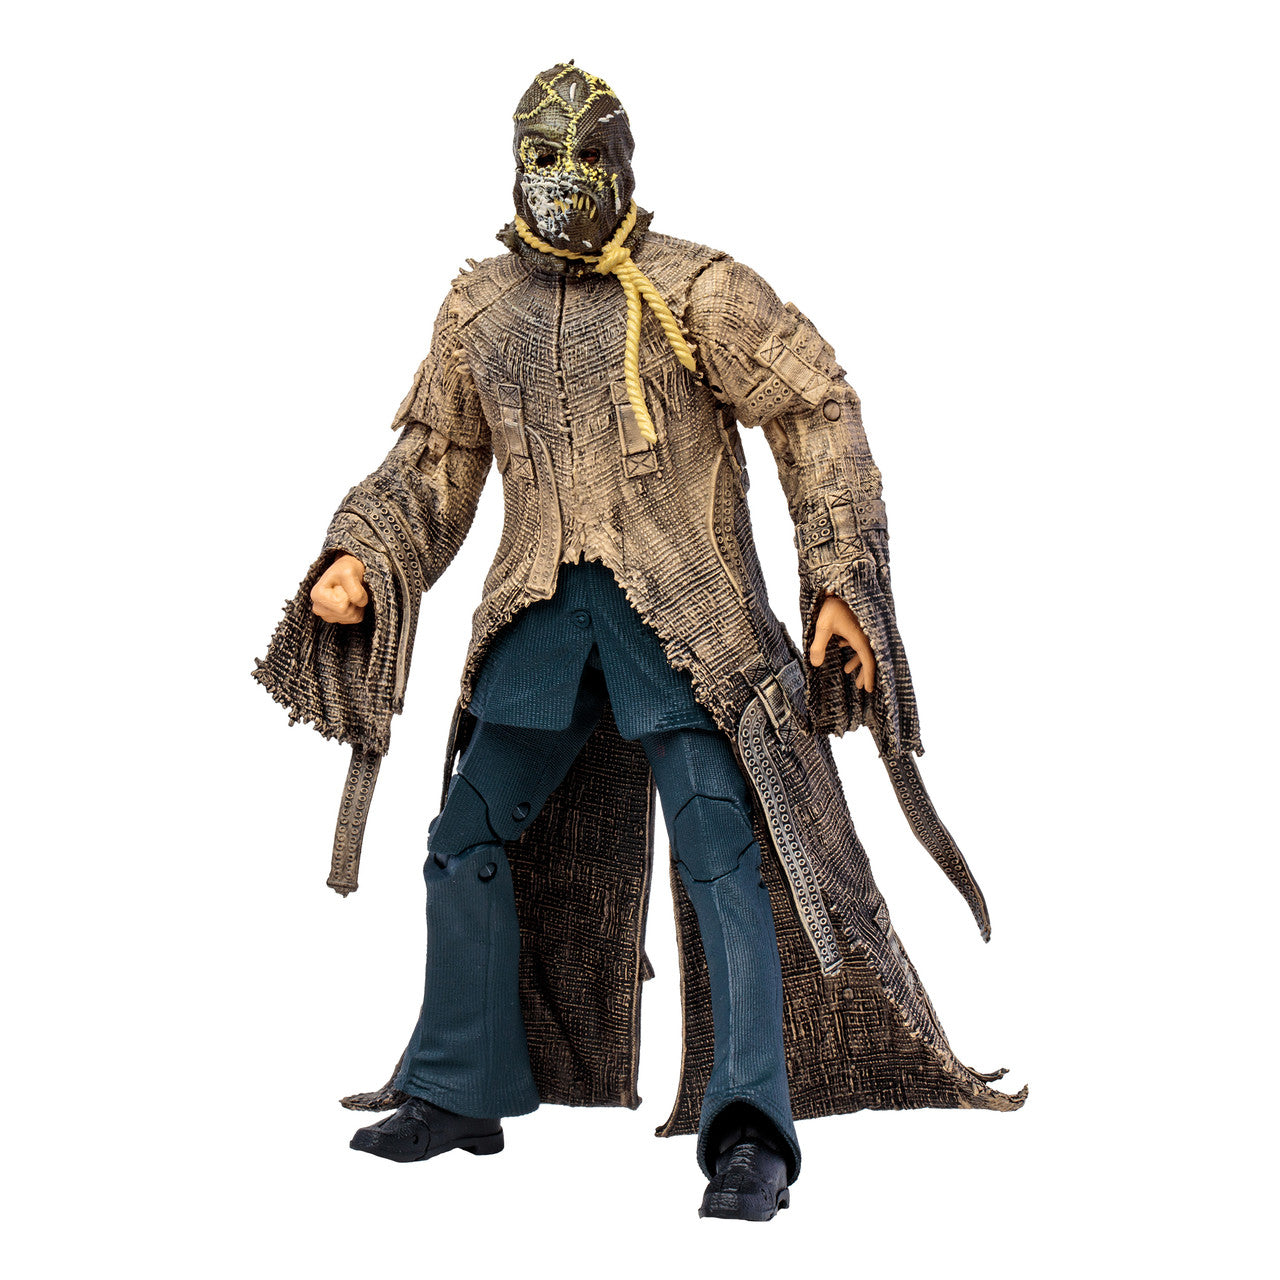 Scarecrow (The Dark Knight Trilogy) 7" Build-A-Figure Bane Series Action Figure by McFarlane Toys -McFarlane Toys - India - www.superherotoystore.com